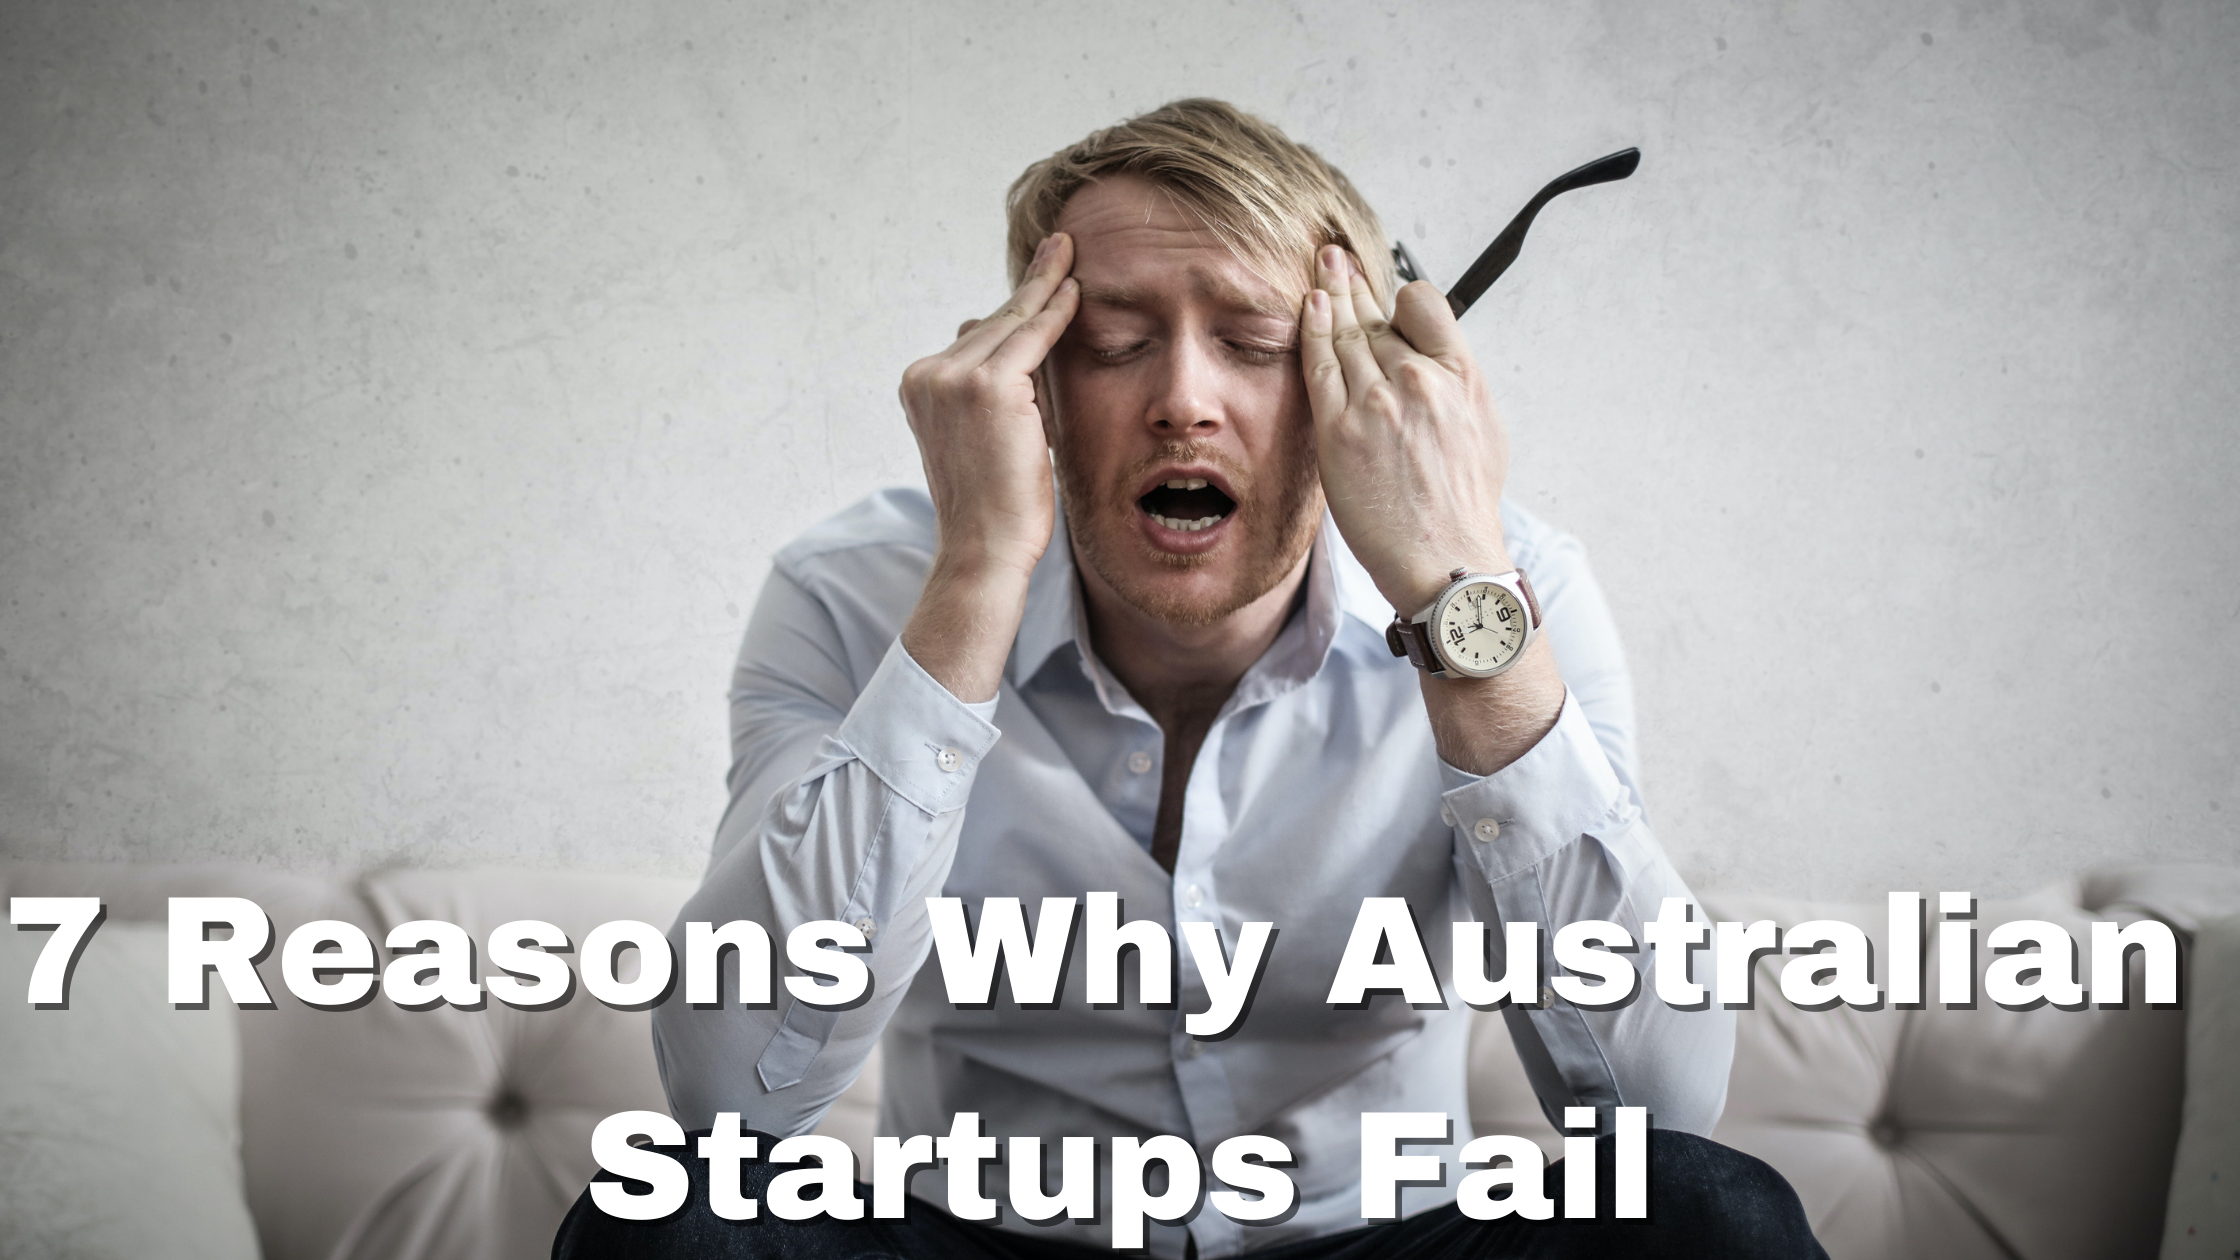 seven reasons why Australian startups fail written in text. A man holding his head in agony